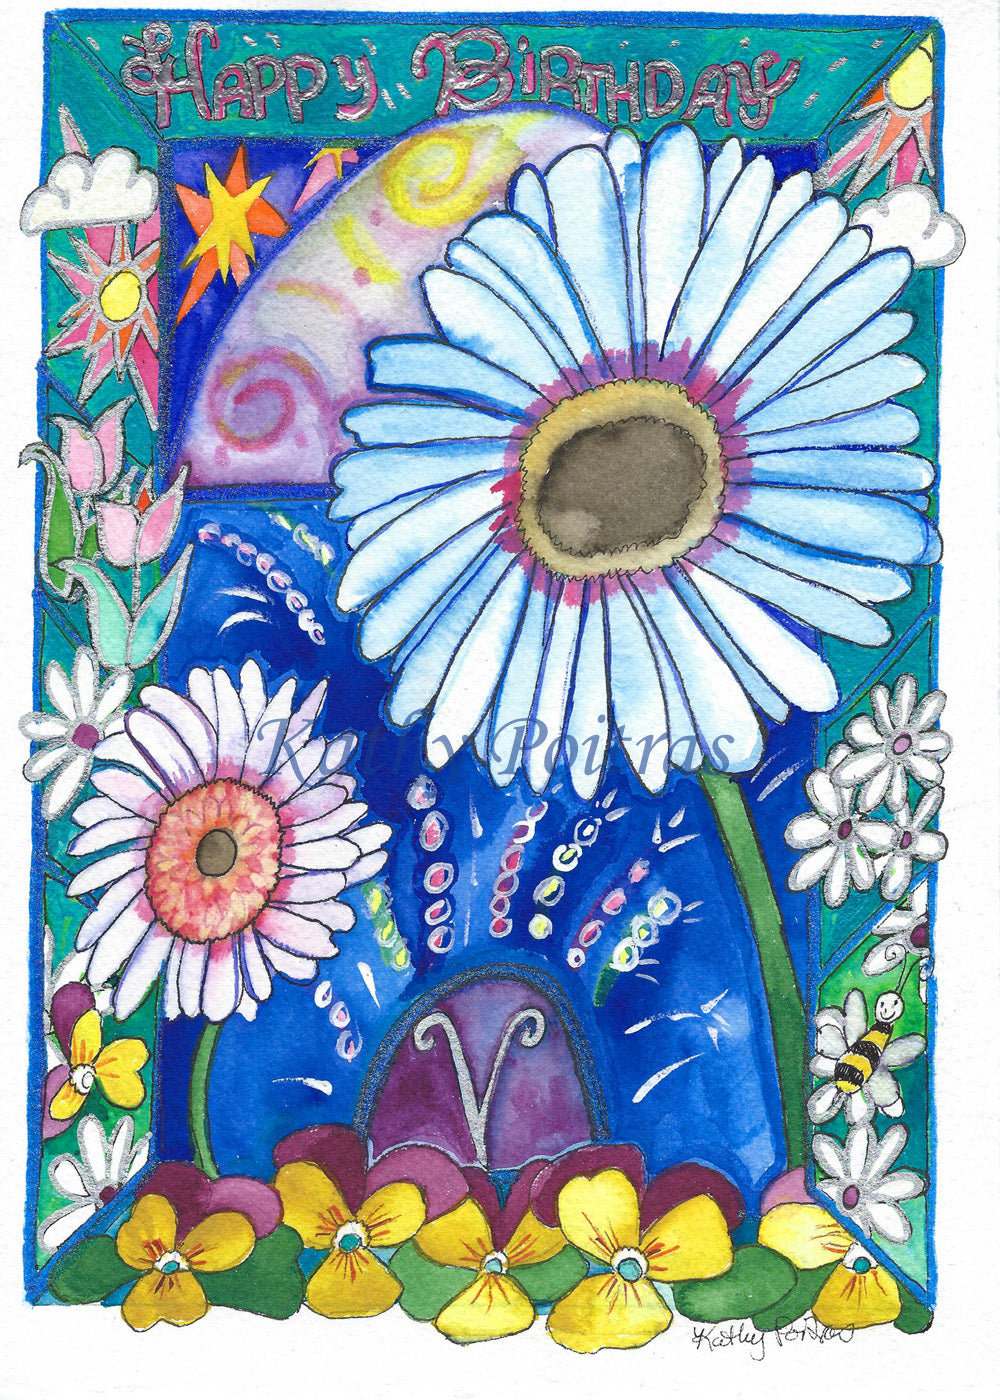 Personalized flower of the month April, Happy Birthday Card. Daisies and the letter V.  A cheerful whimsical cathedral with celebratory fireworks featuring the letter V, and daisies.  Surrounded by a border with naïve images expressing life.  There are violets on the bottom of the border.    Happy Birthday is written on the top. 